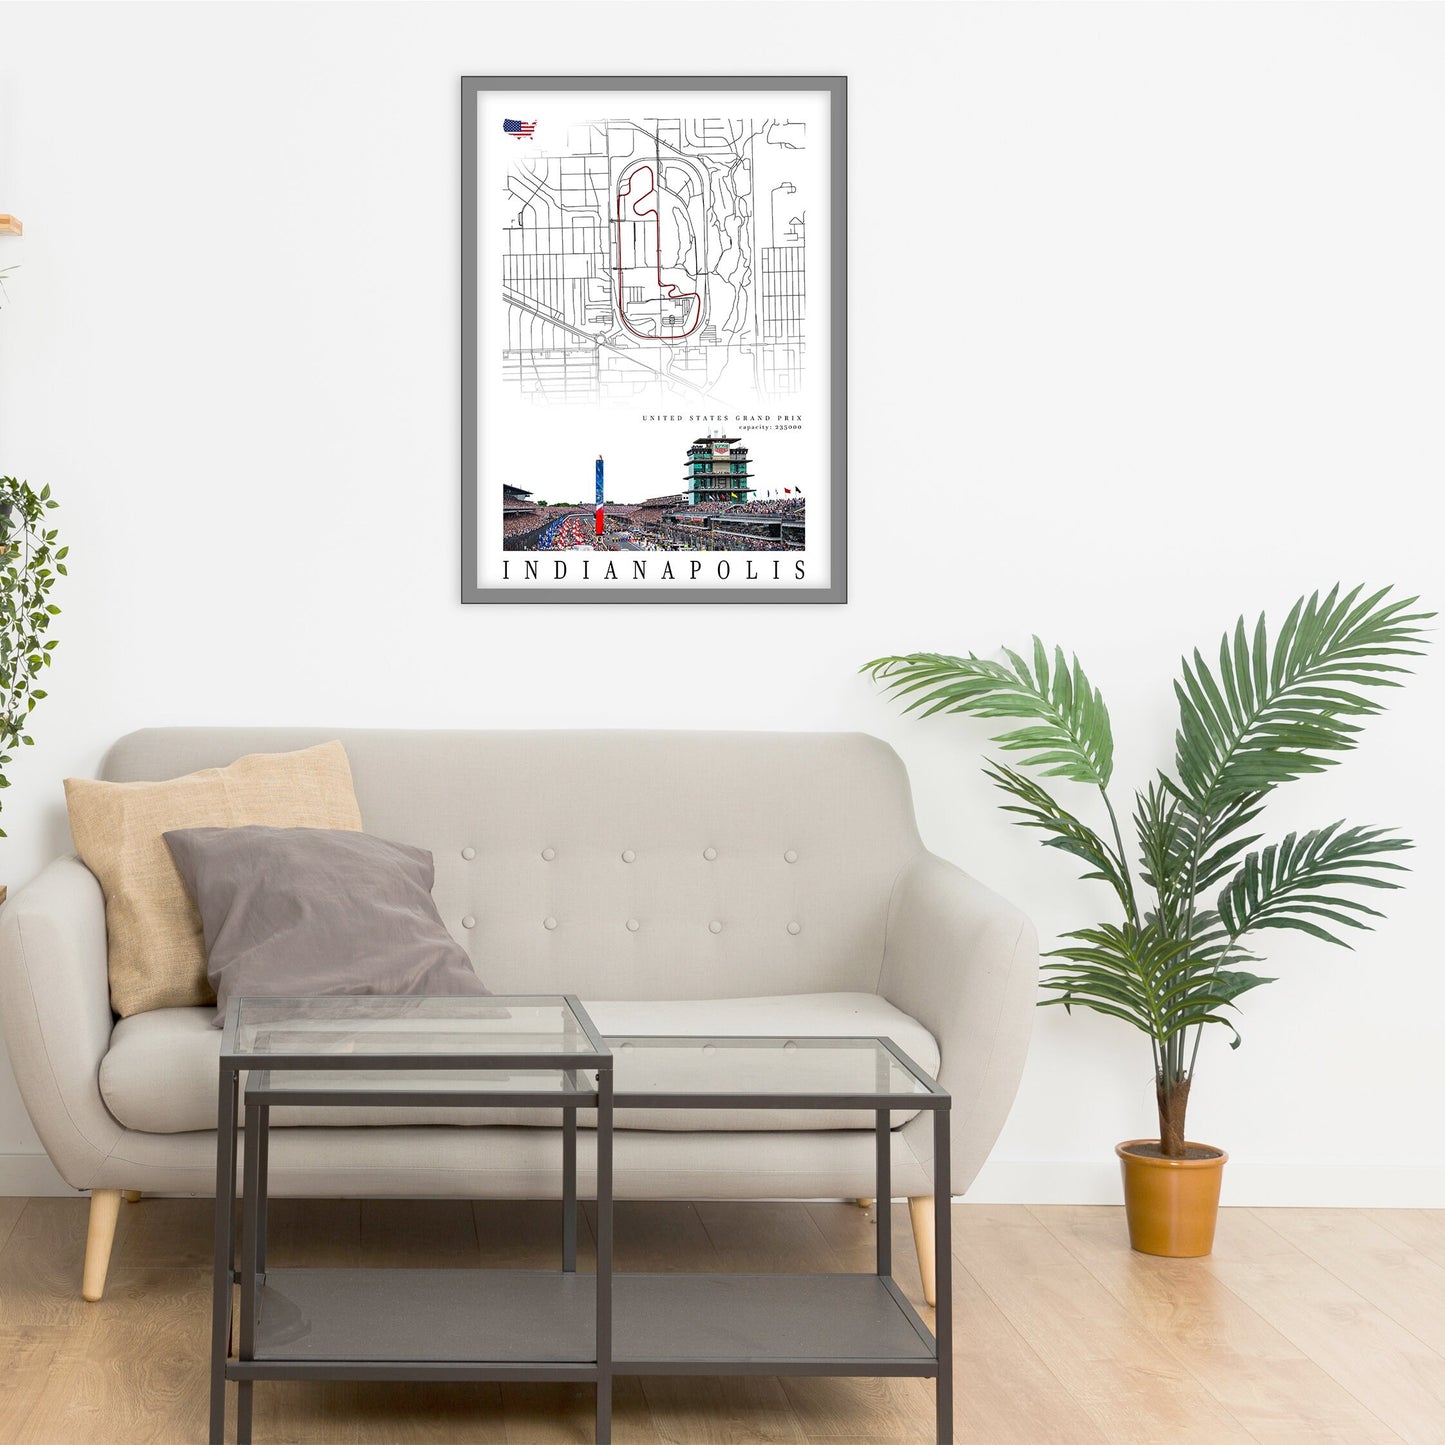 City map of INDIANAPOLIS - United States Grand Prix - Home Decor Indianapolis - Wall decor Indianapolis - Formula 1 gift - Printed map